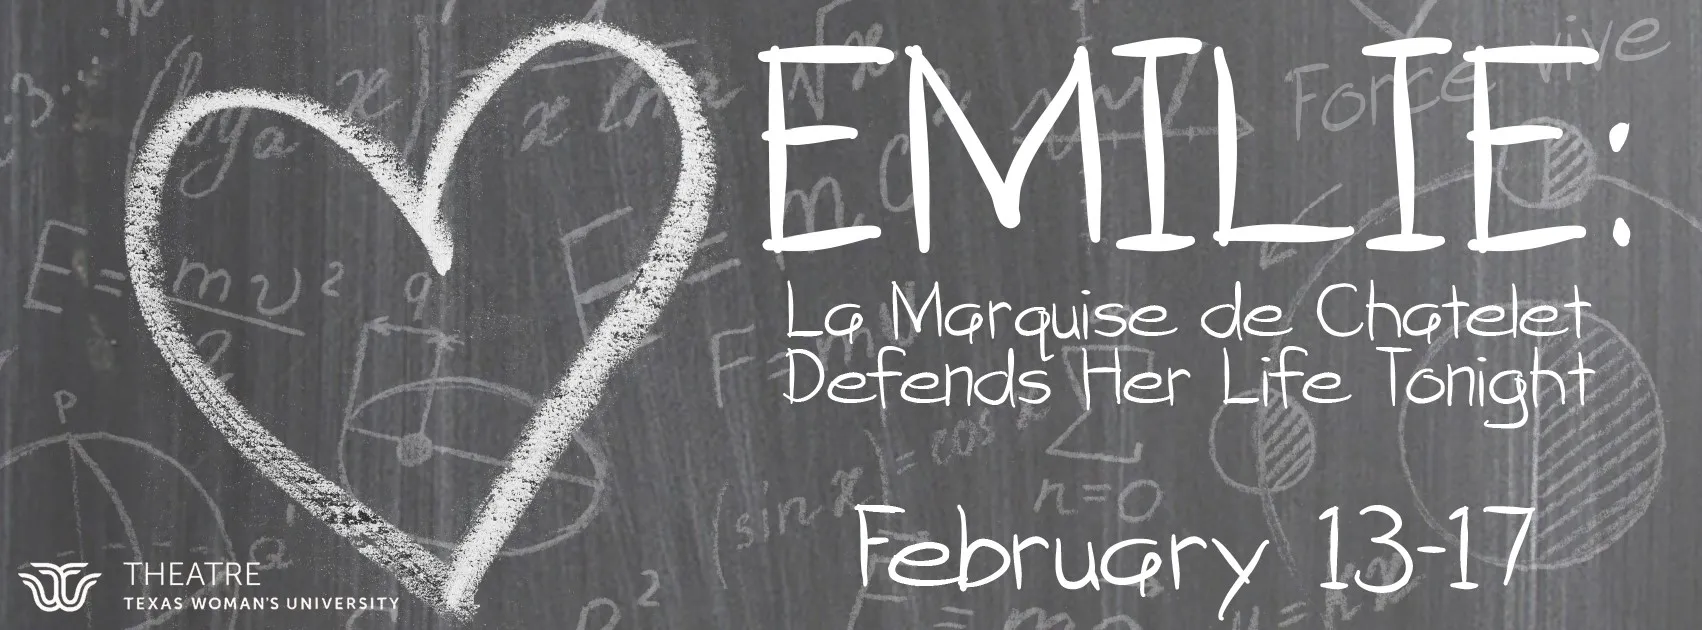 ‘Emilie: La Marquise Du Châtelet Defends Her Life Tonight’ written on a chalkboard with production dates Feb. 13-17 